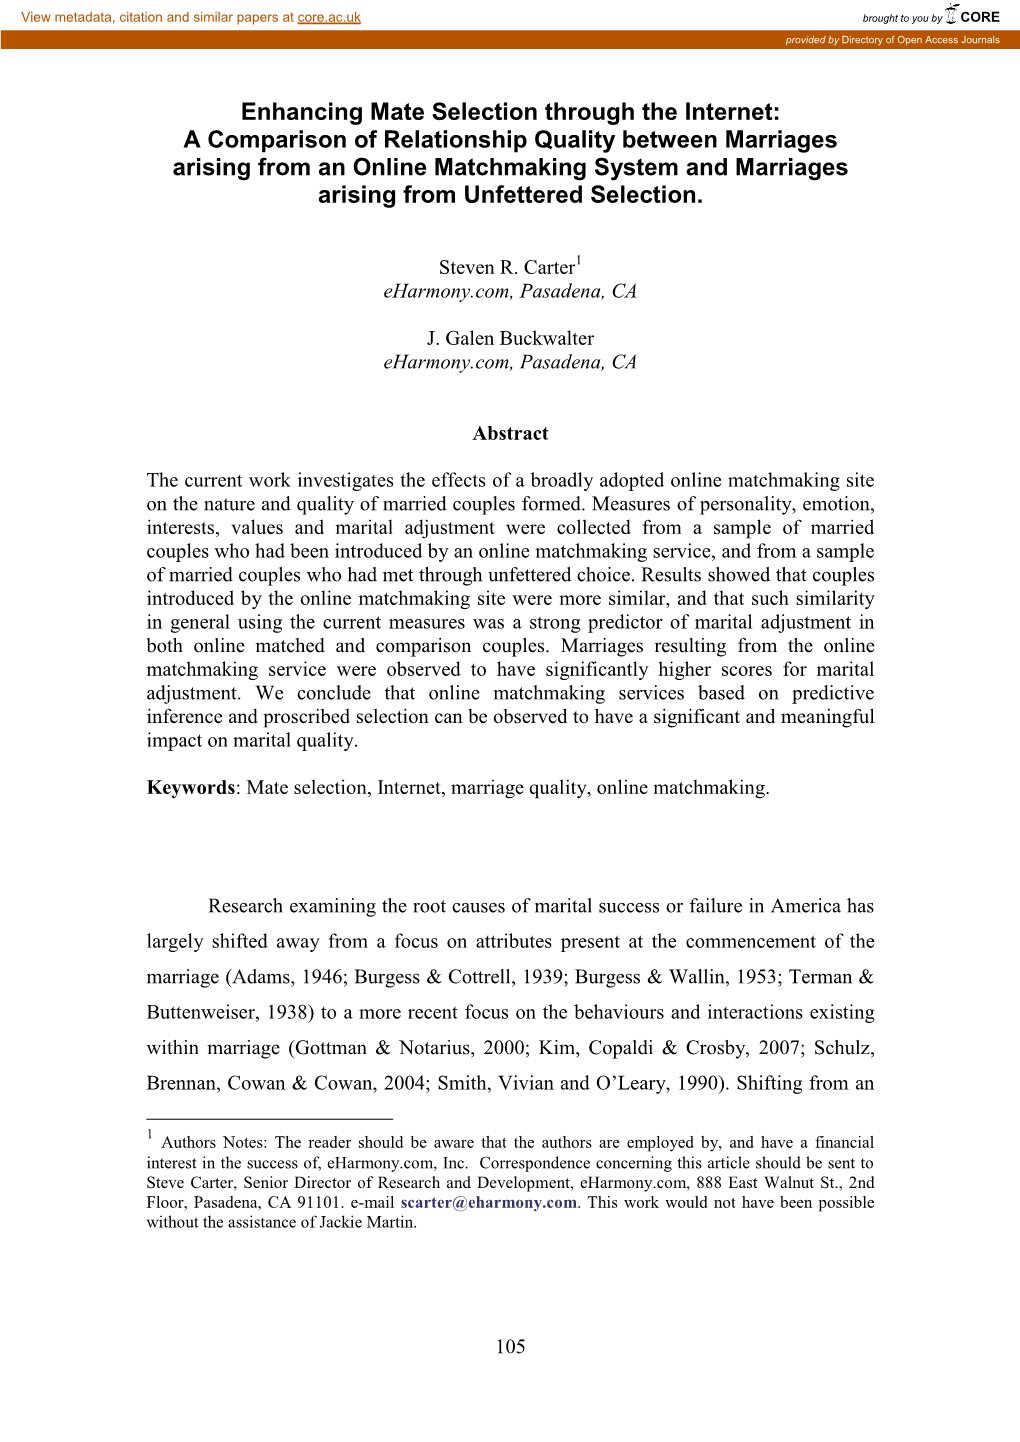 Enhancing Mate Selection Through the Internet: a Comparison Of